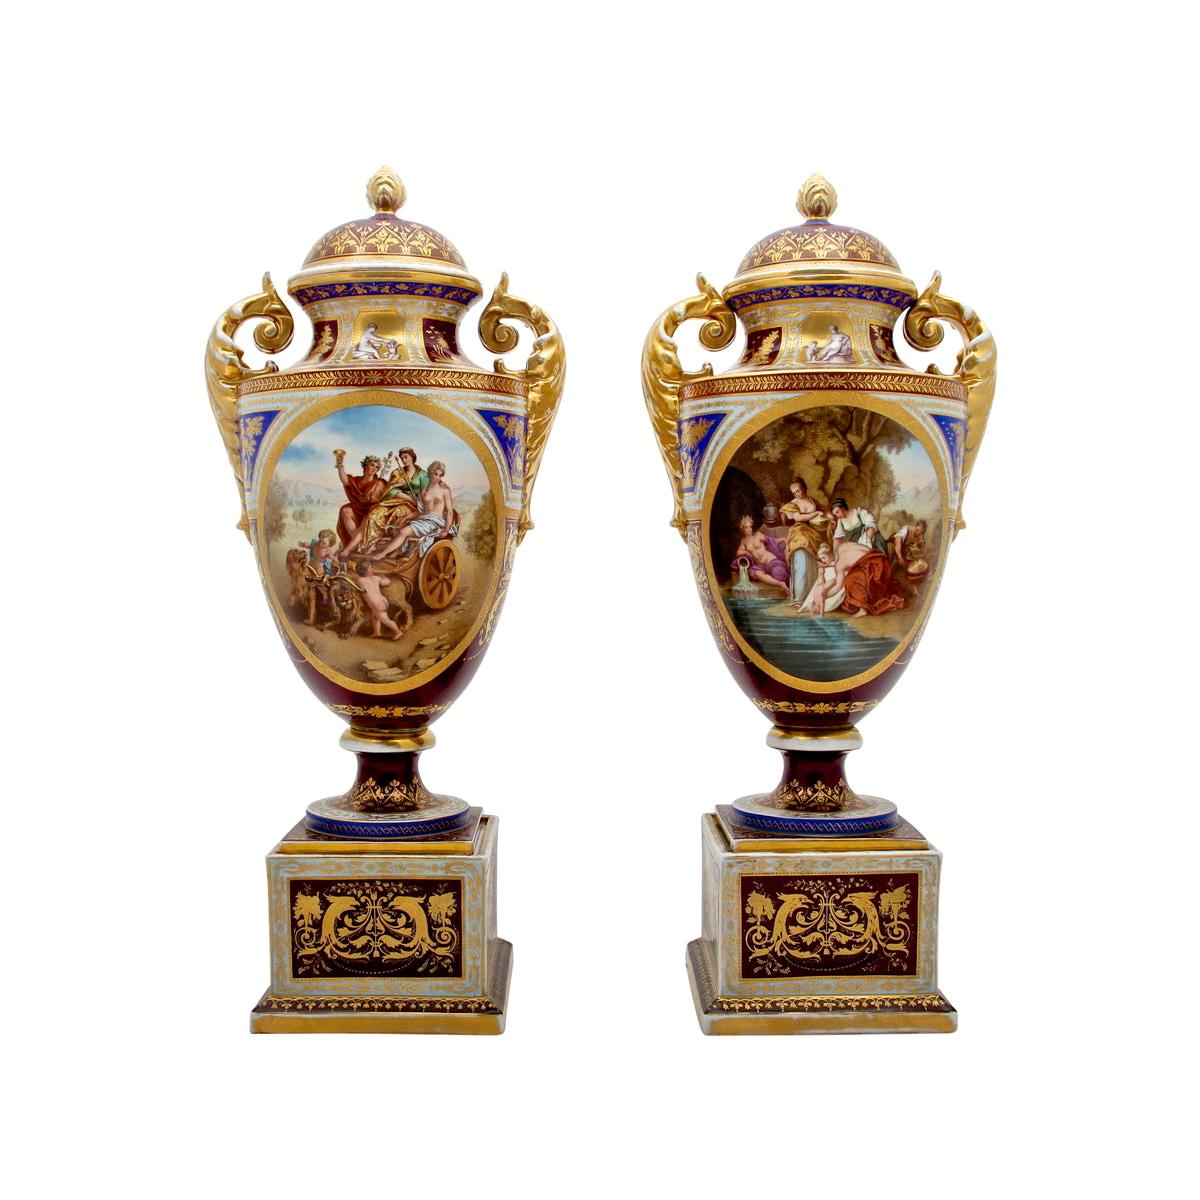 Pair of Royal Vienna Porcelain Vases and Covers 